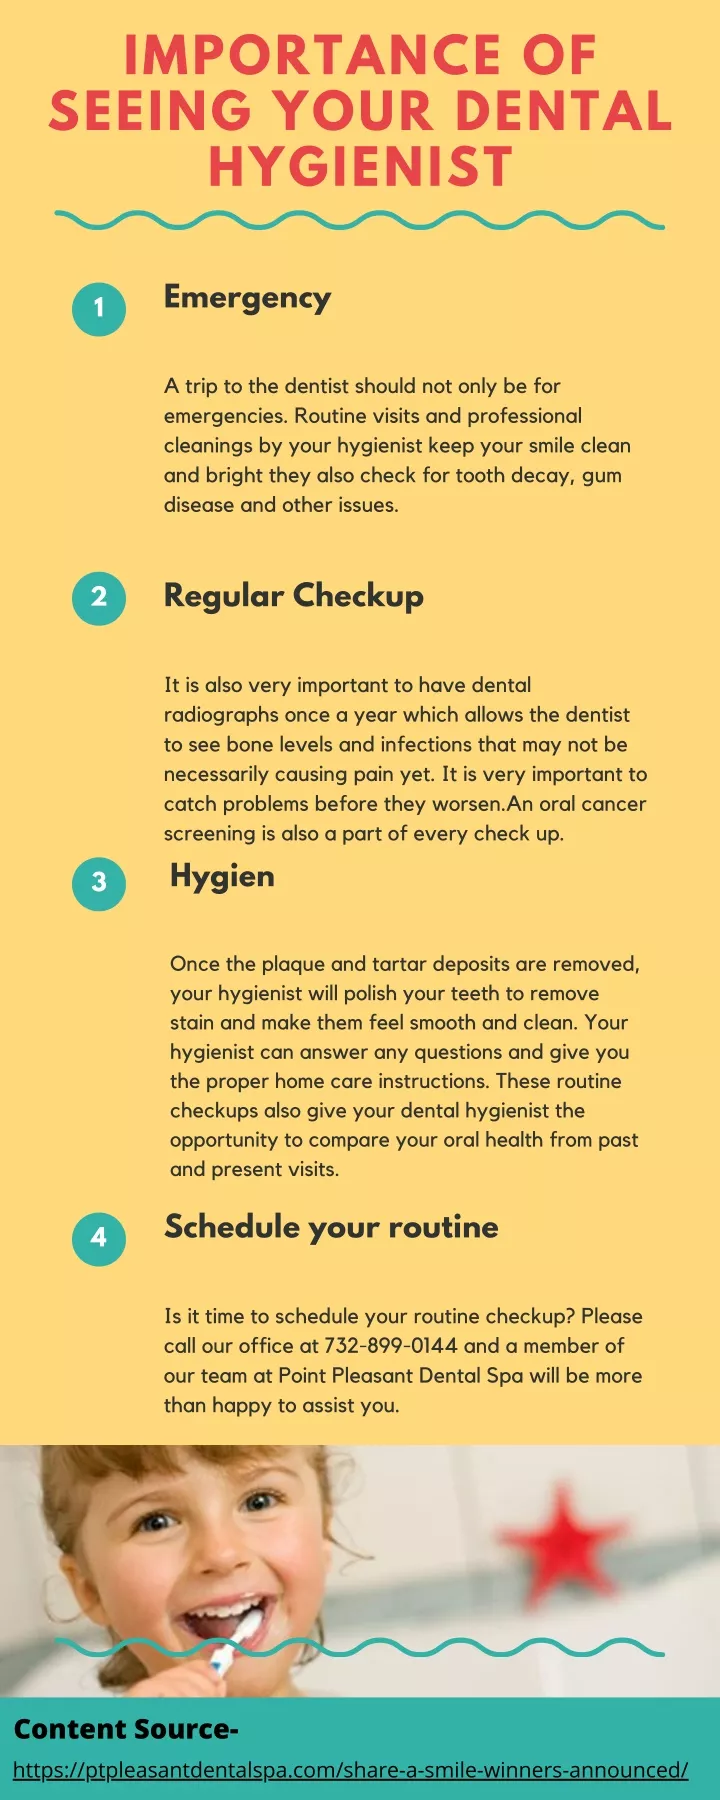 importance of seeing your dental hygienist